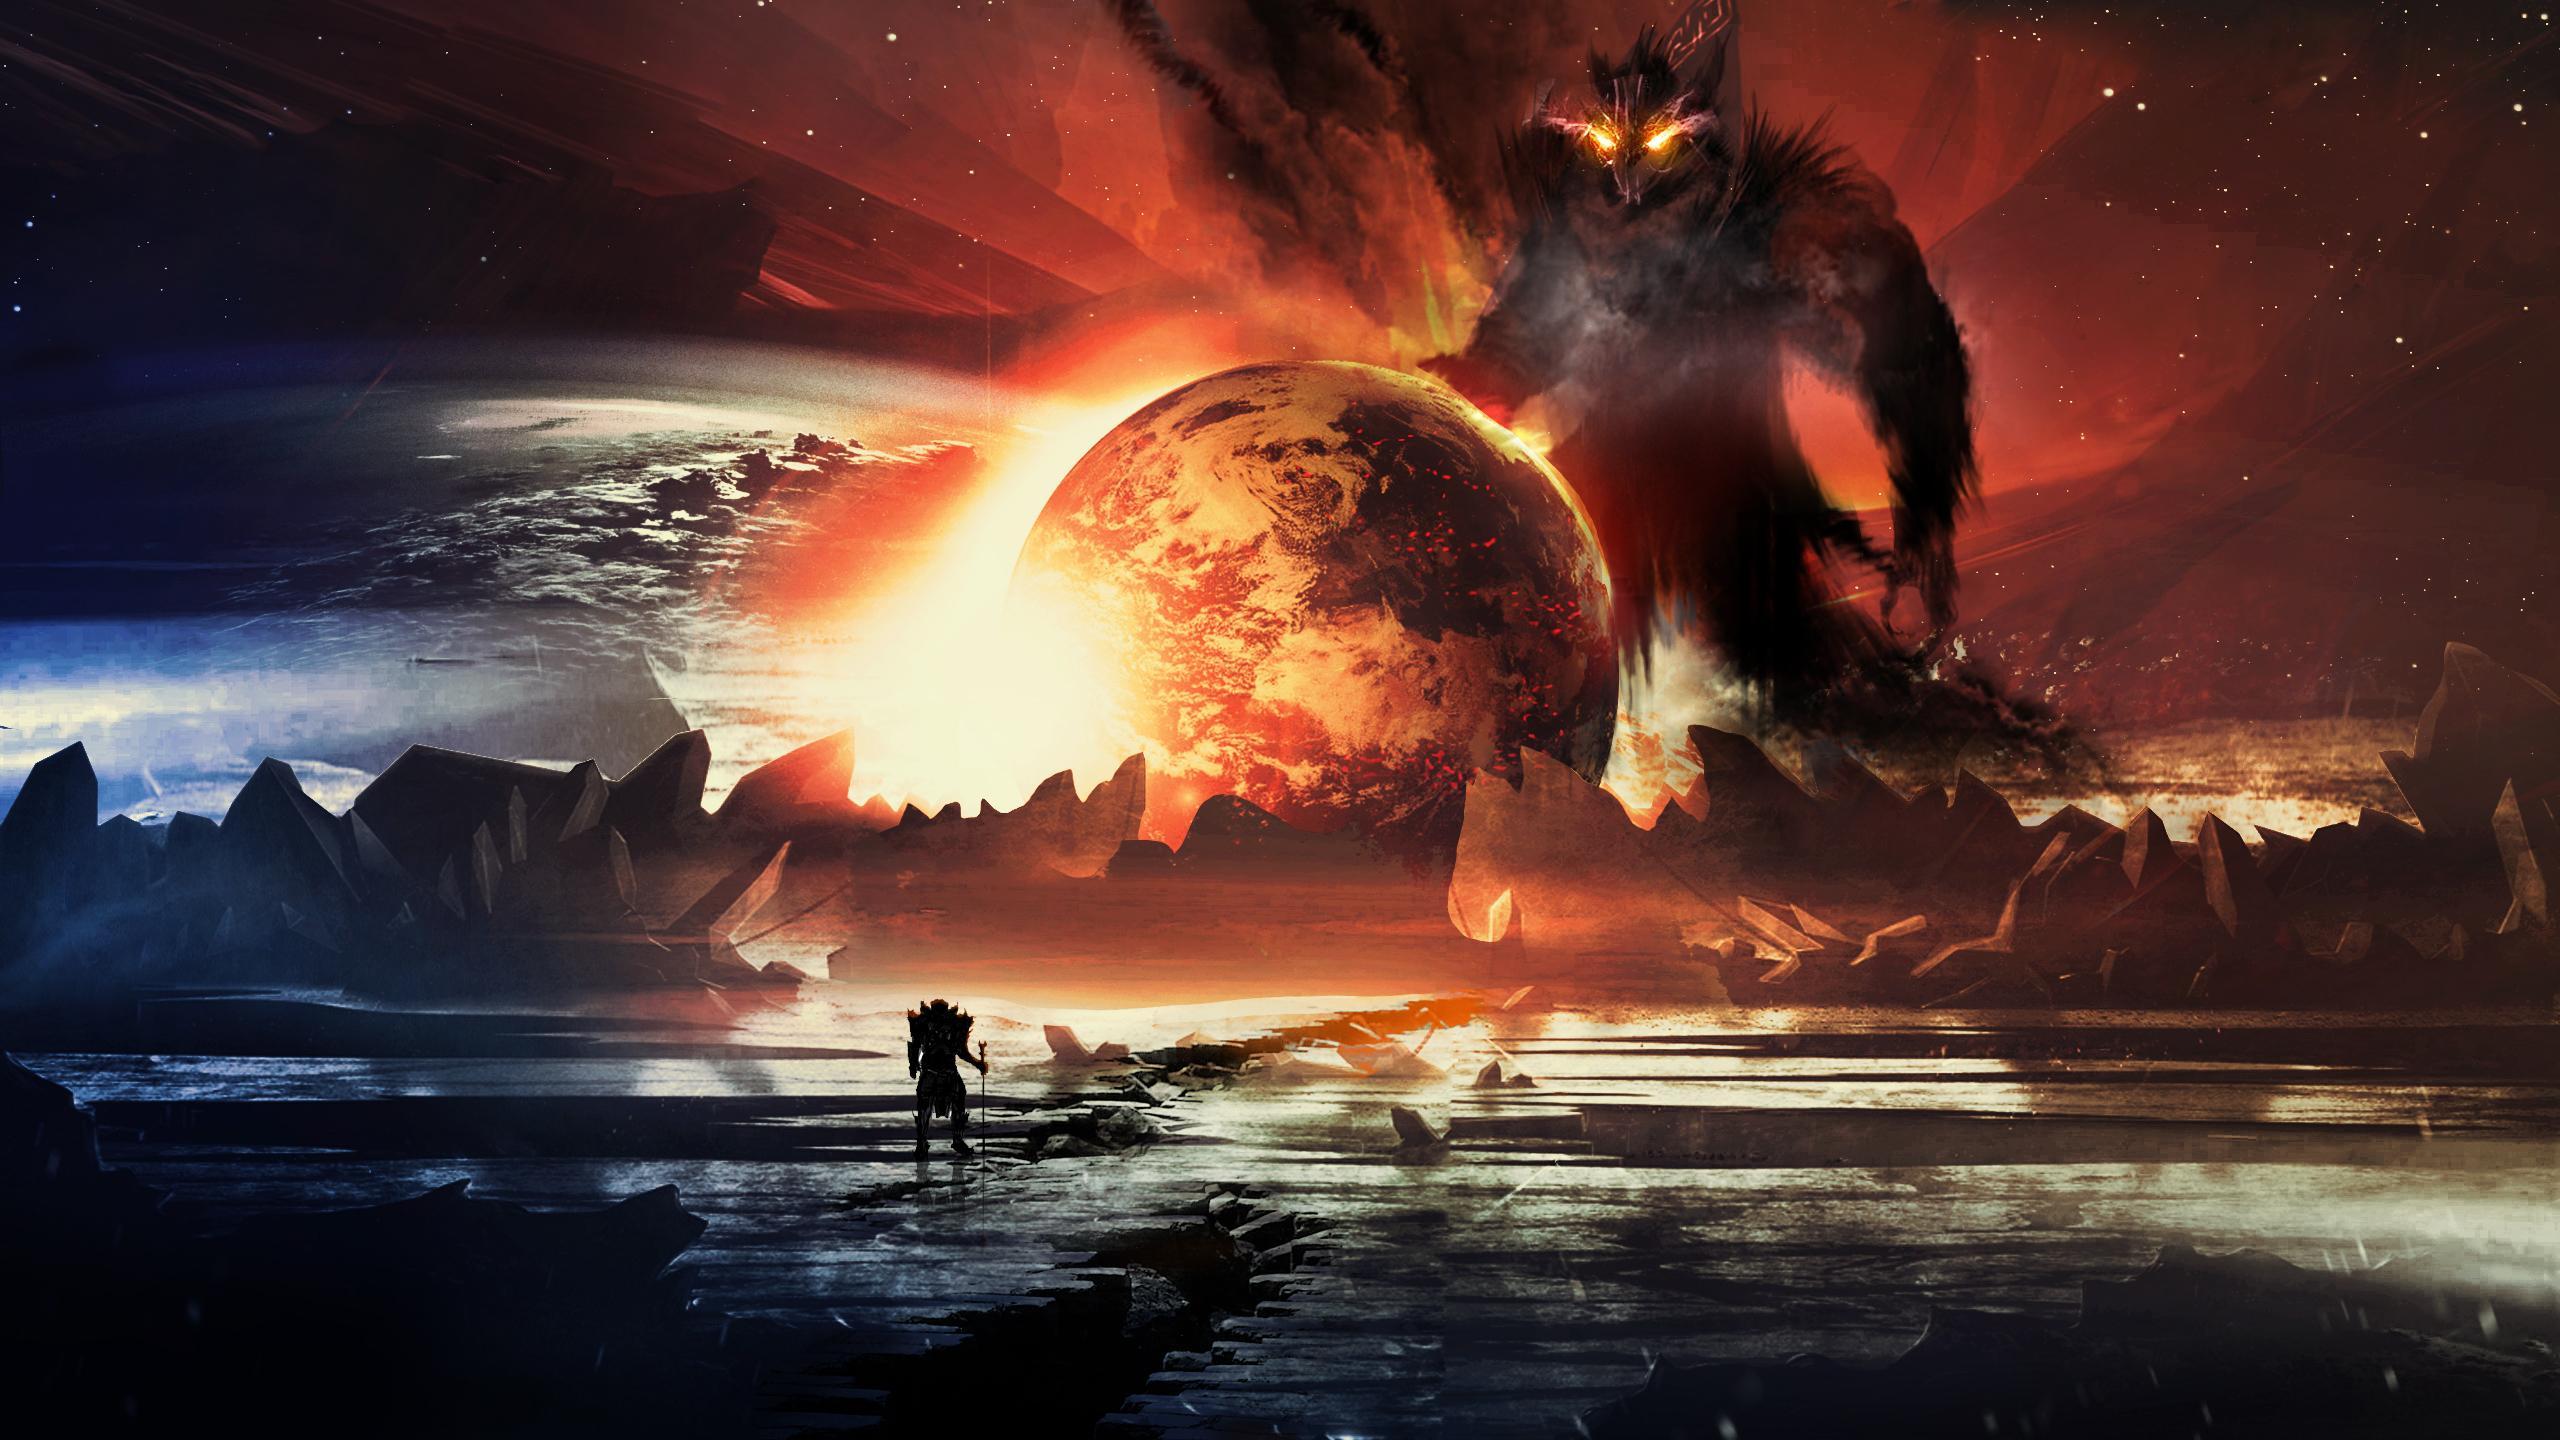 image Planets Monsters Fantasy Night 2560x1440